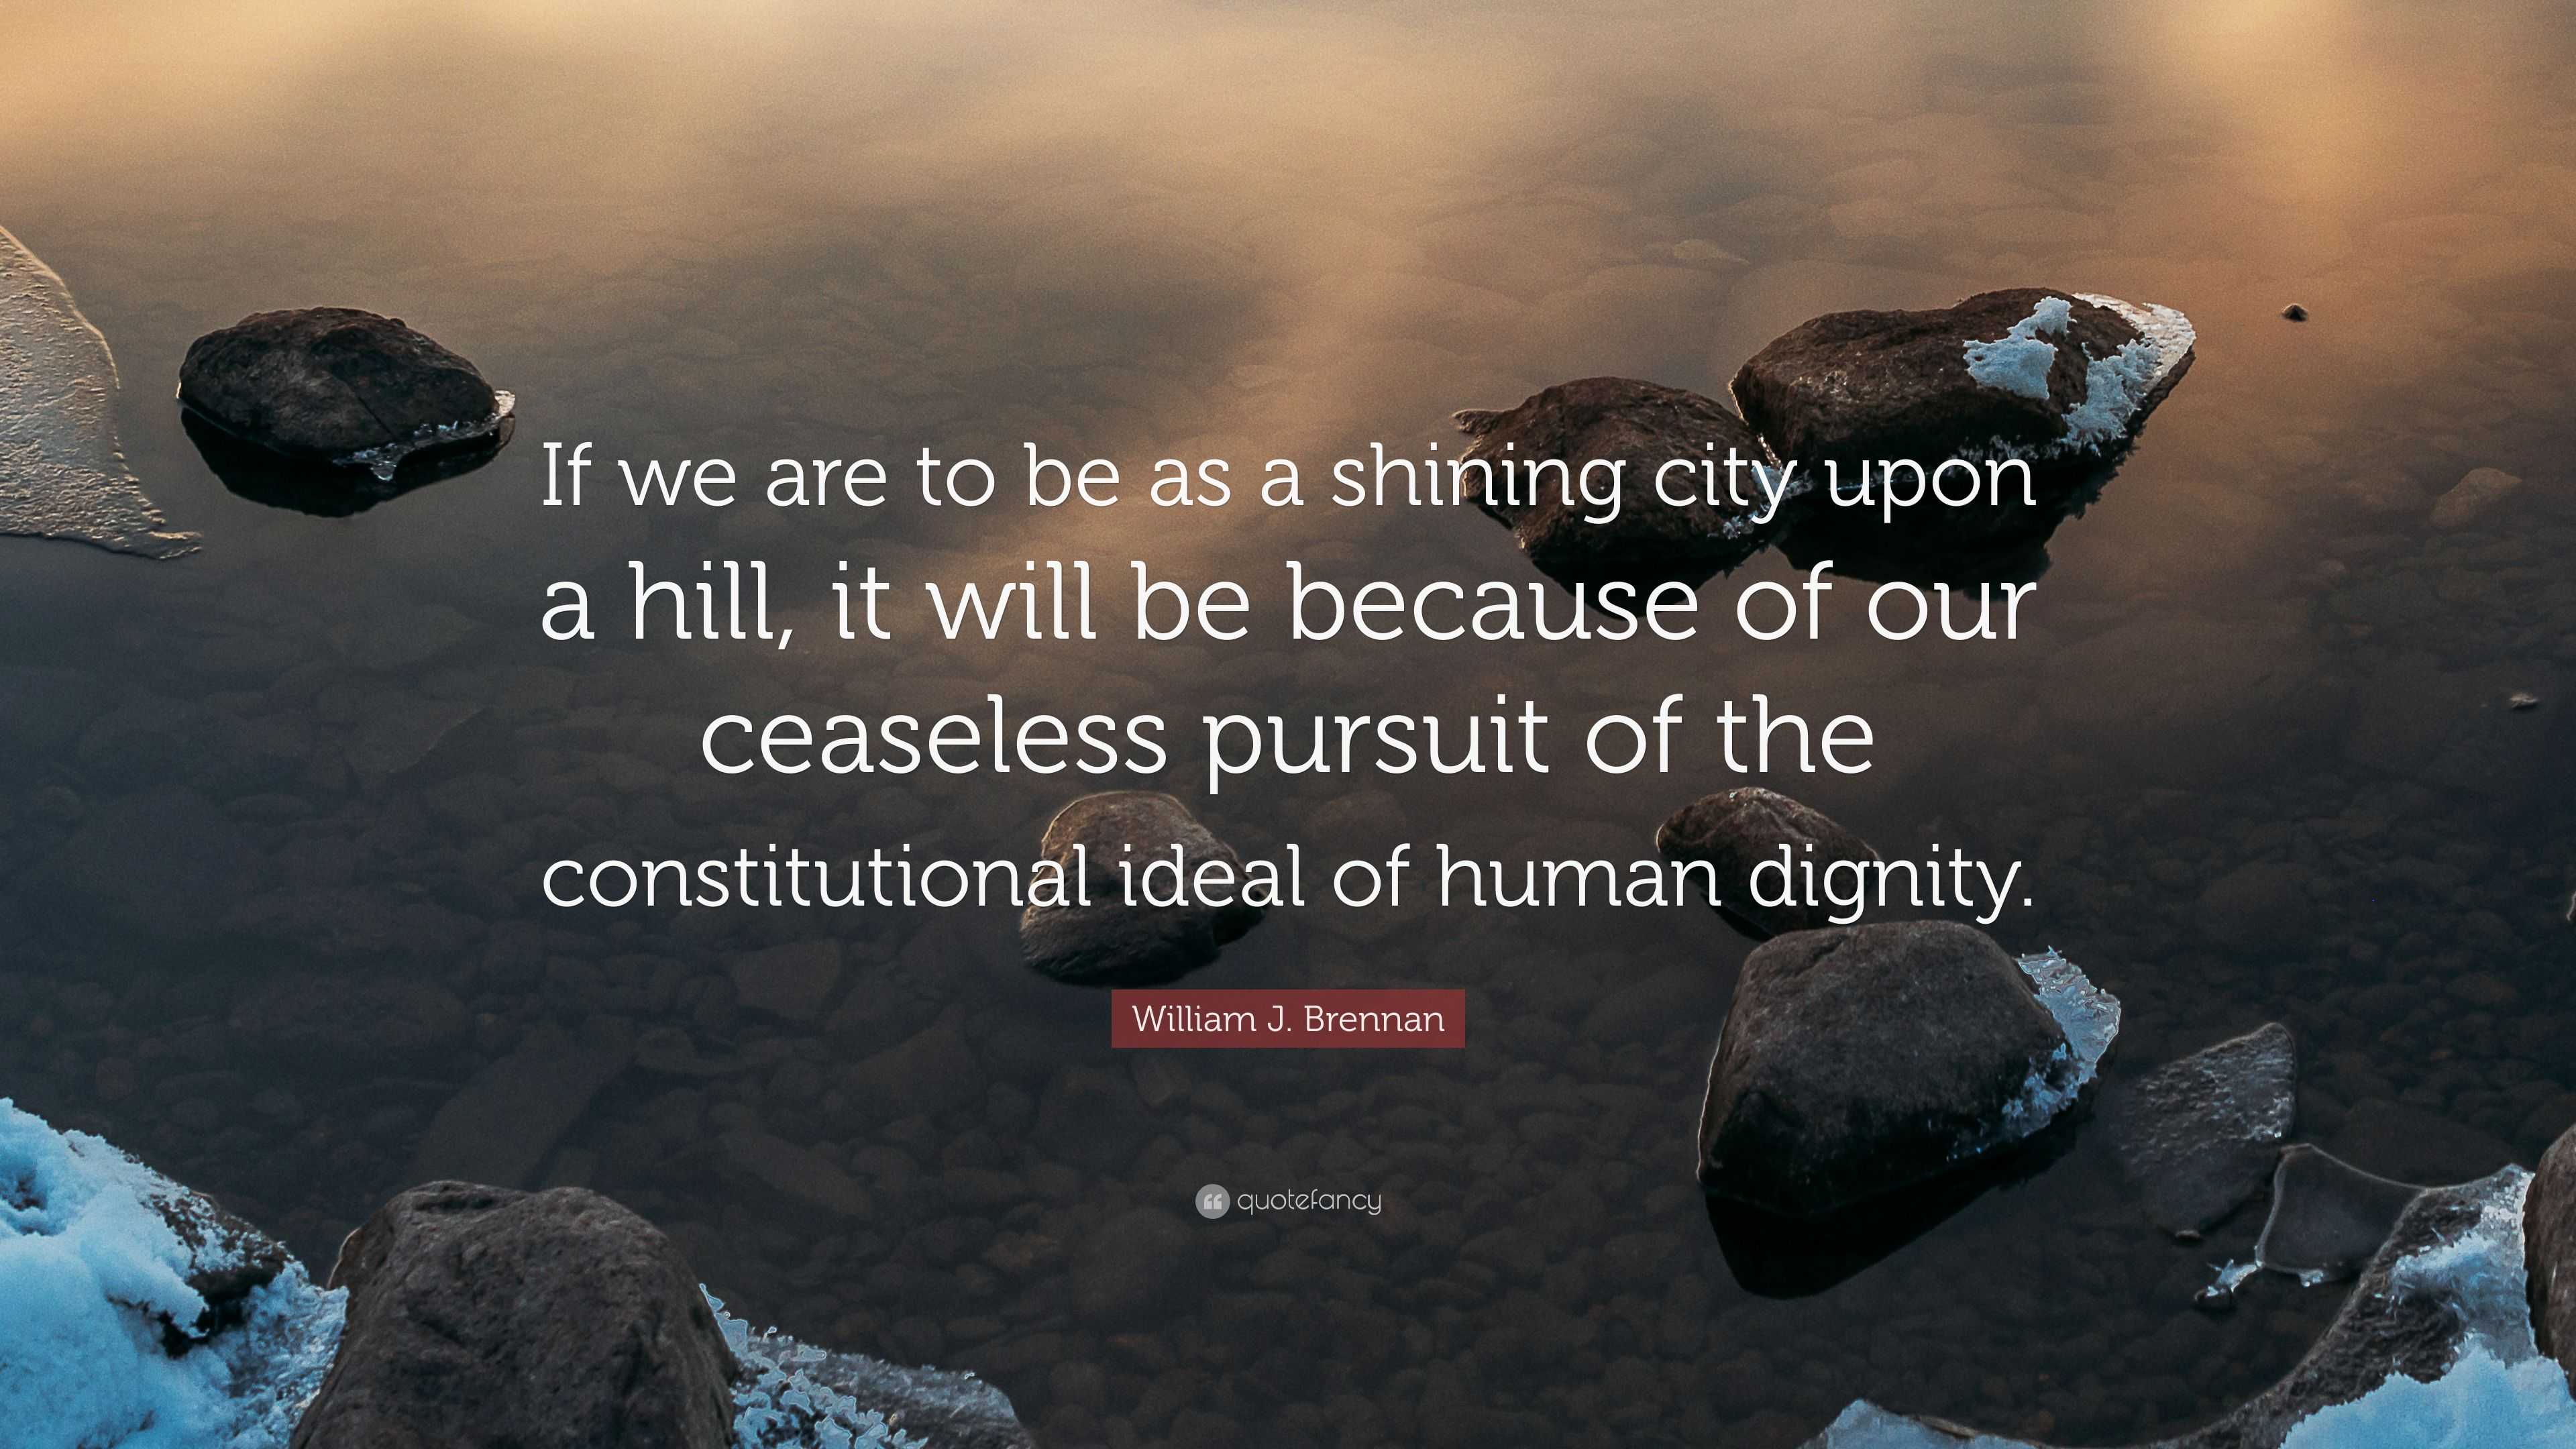 William J Brennan Quote “if We Are To Be As A Shining City Upon A Hill It Will Be Because Of 4519